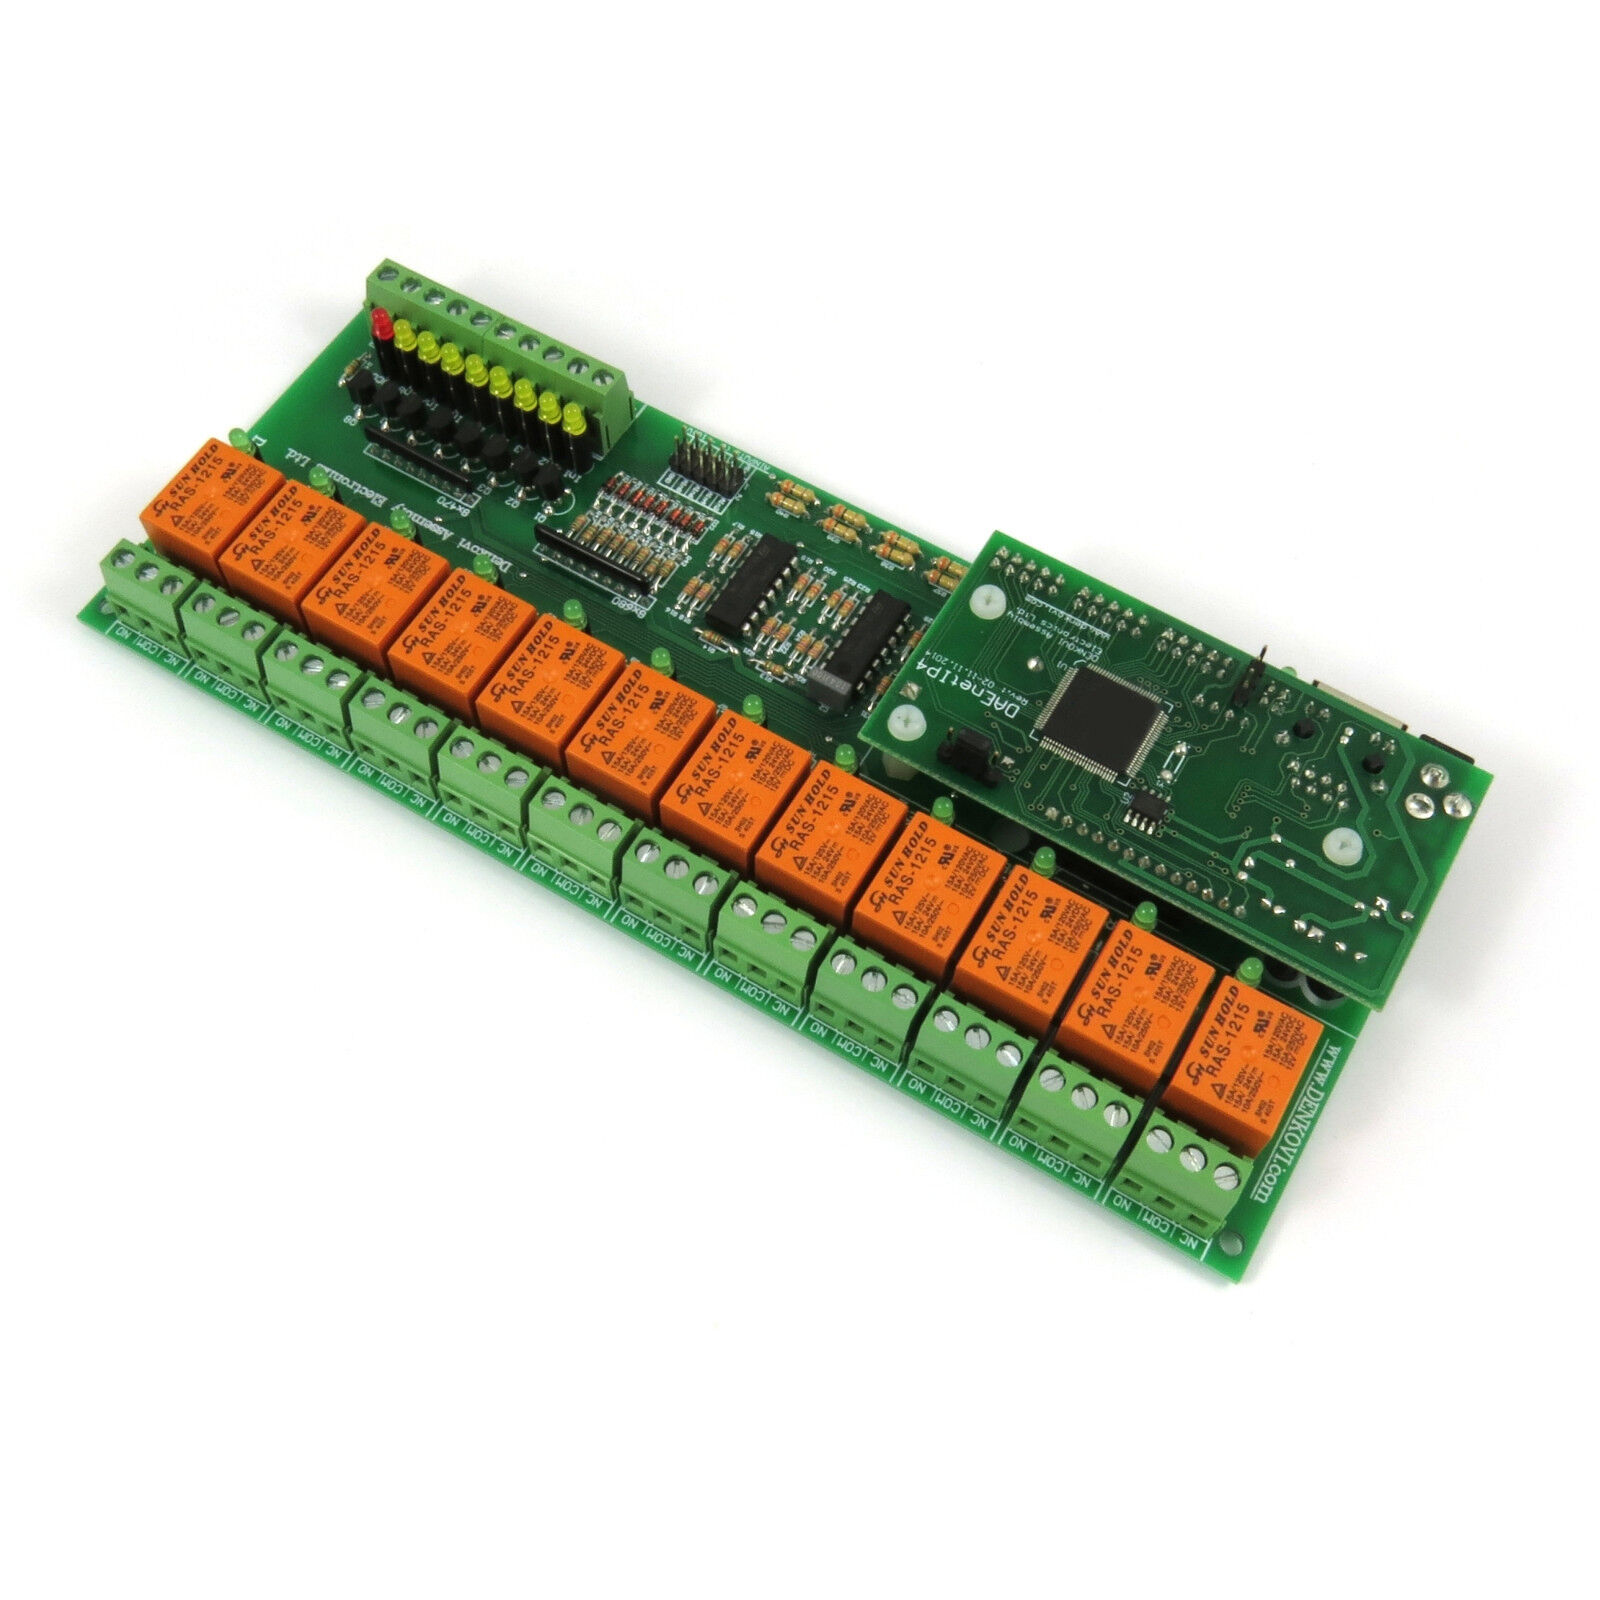 Internet/Ethernet 12 Relay Channel Board - SNMP, WEB, XML, ADC, Counters, Timers